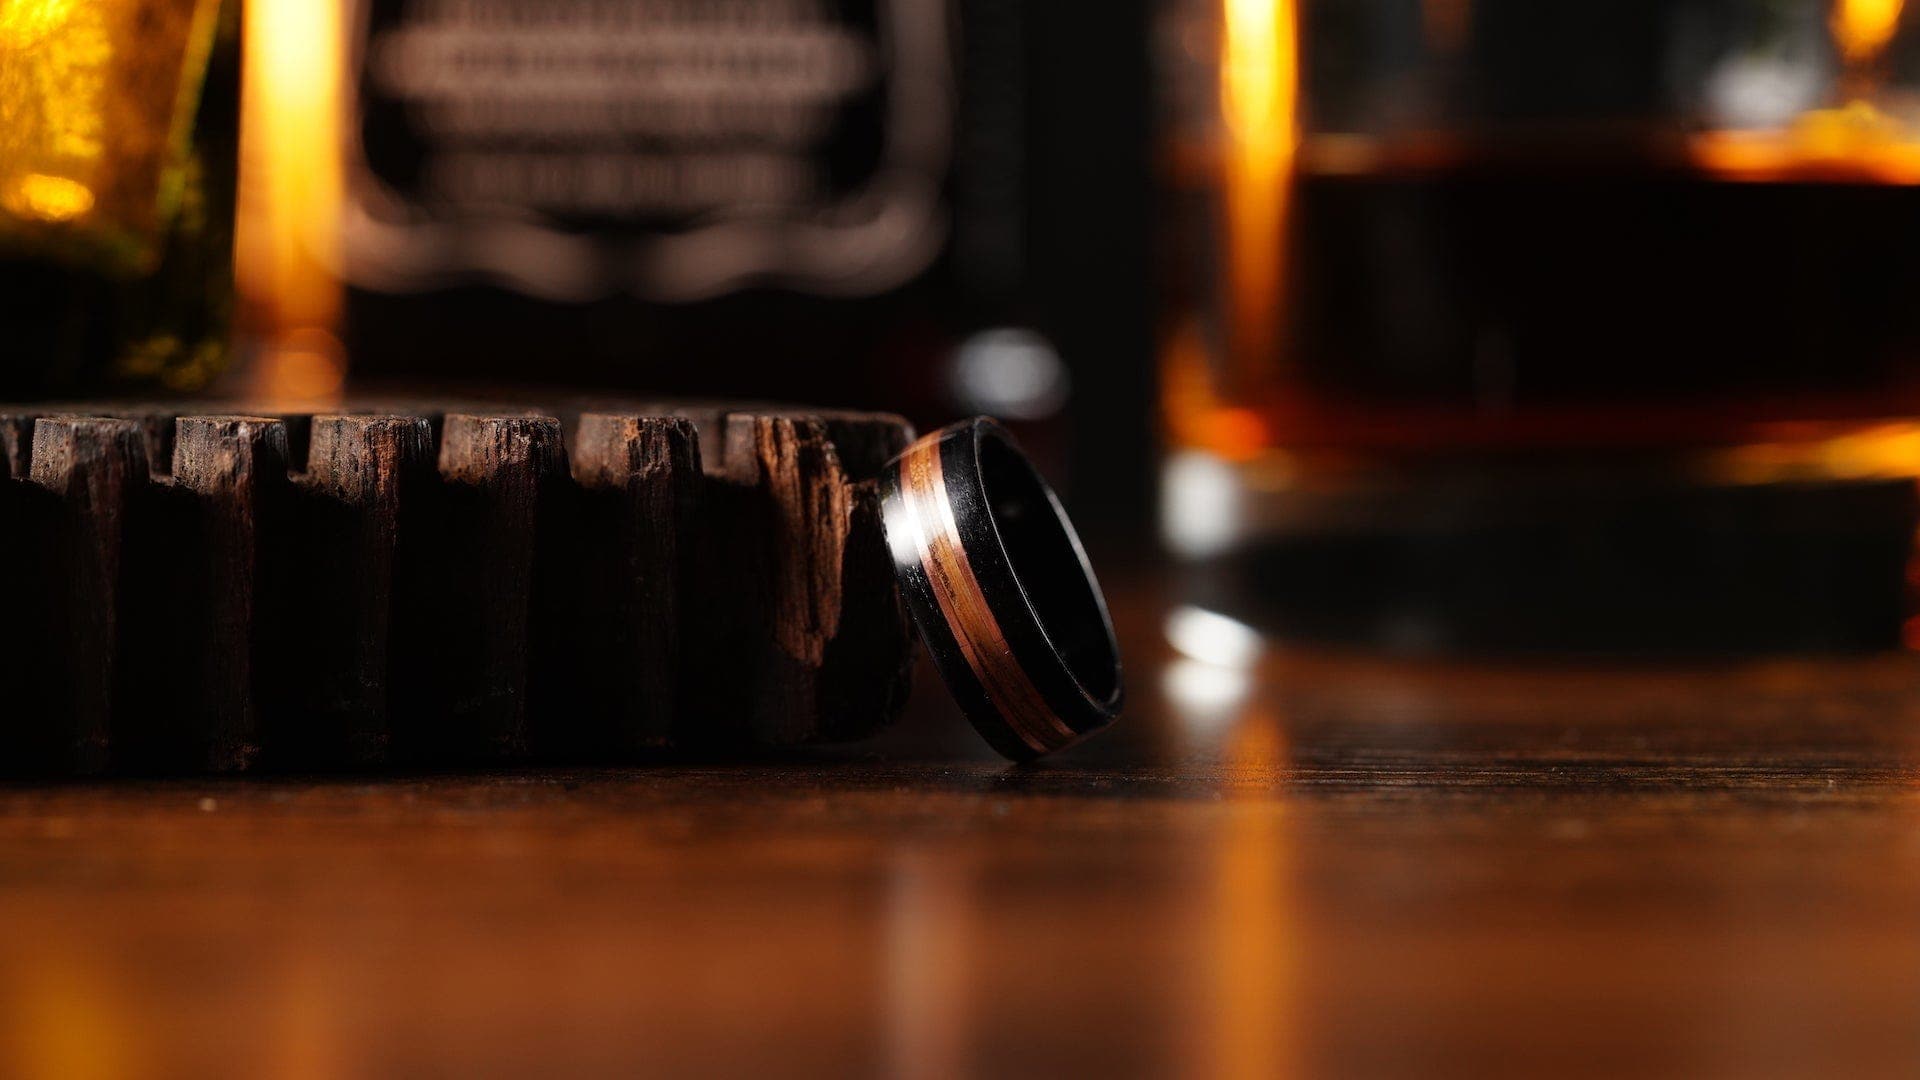 The Prohibition - Men's Wedding Rings - Manly Bands